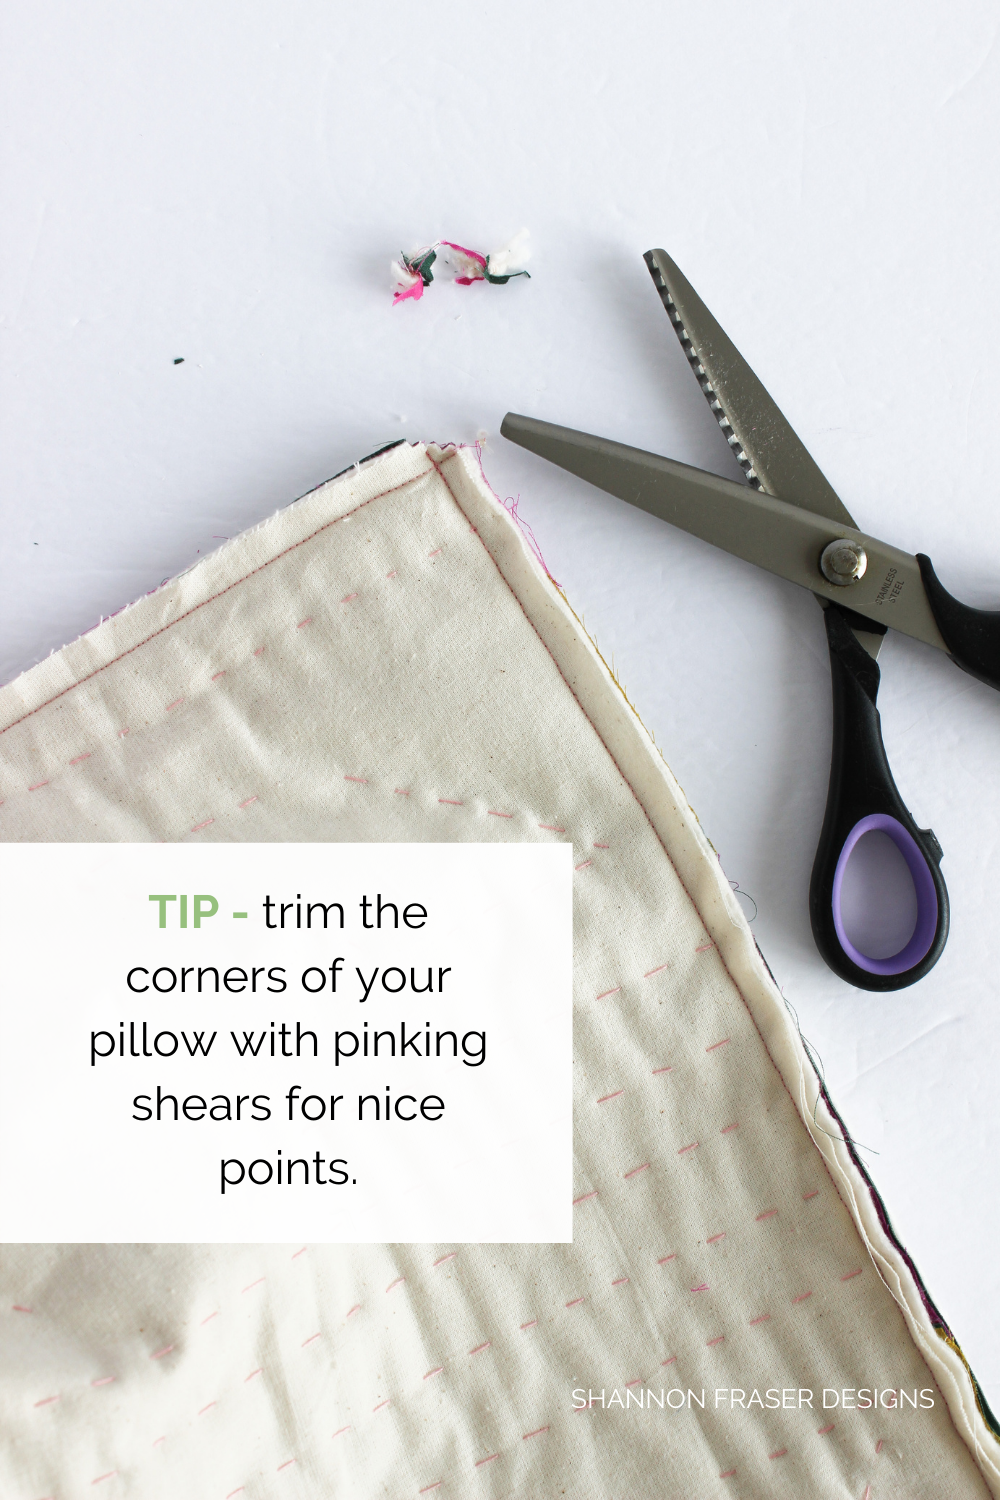 Shattered Star lumbar pillow with the corners trimmed using pinking shears to reduce bulk for nice corners | Sewing tutorial: How to insert a metal zipper | Shannon Fraser Designs #howtosew